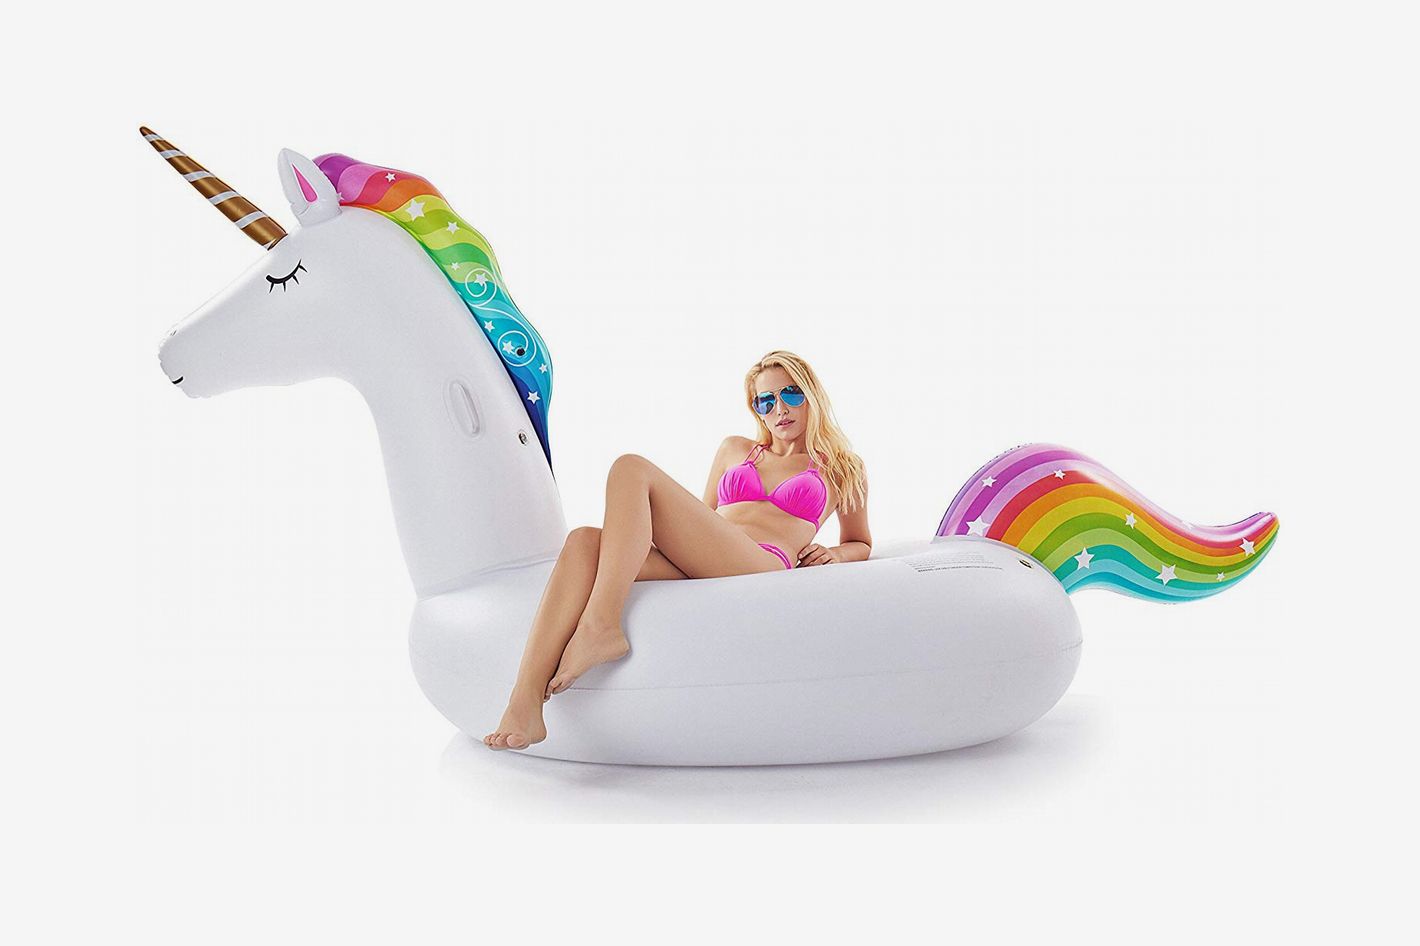 iGeeKid Pool Float for Kids Unicorn Flamingo Swim Floats for Toddlers Age 3-6 Years Inflatable Unicorn Floaties Swimming Ring Ride On Party Toys for Girls Boys Summer Beach Supplies